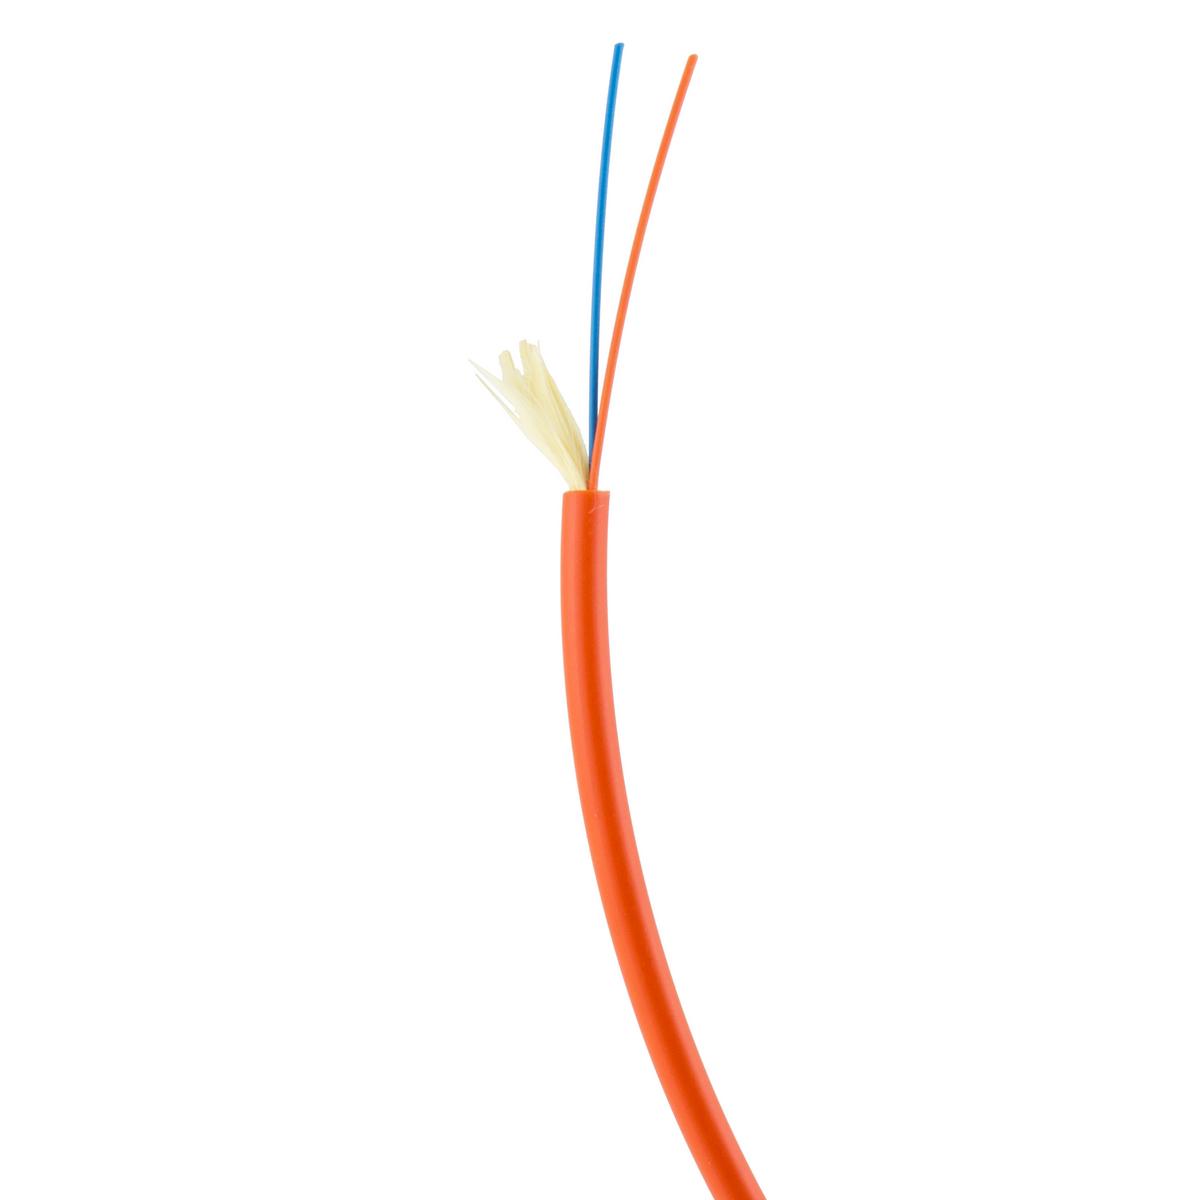 Hubbell HFCD1002R6 HFCD1 Series Indoor Tight Buffer Distribution, 2 strand, Riser, OM1, MM , Orange Jacket  ; Corning ClearCurve� Multimode Bend-Insensitive Optical Fiber ; E-Z Strip Buffer For Contractor-Friendly Termination ; Compact Cable Diameter Reduces Pathway Congest